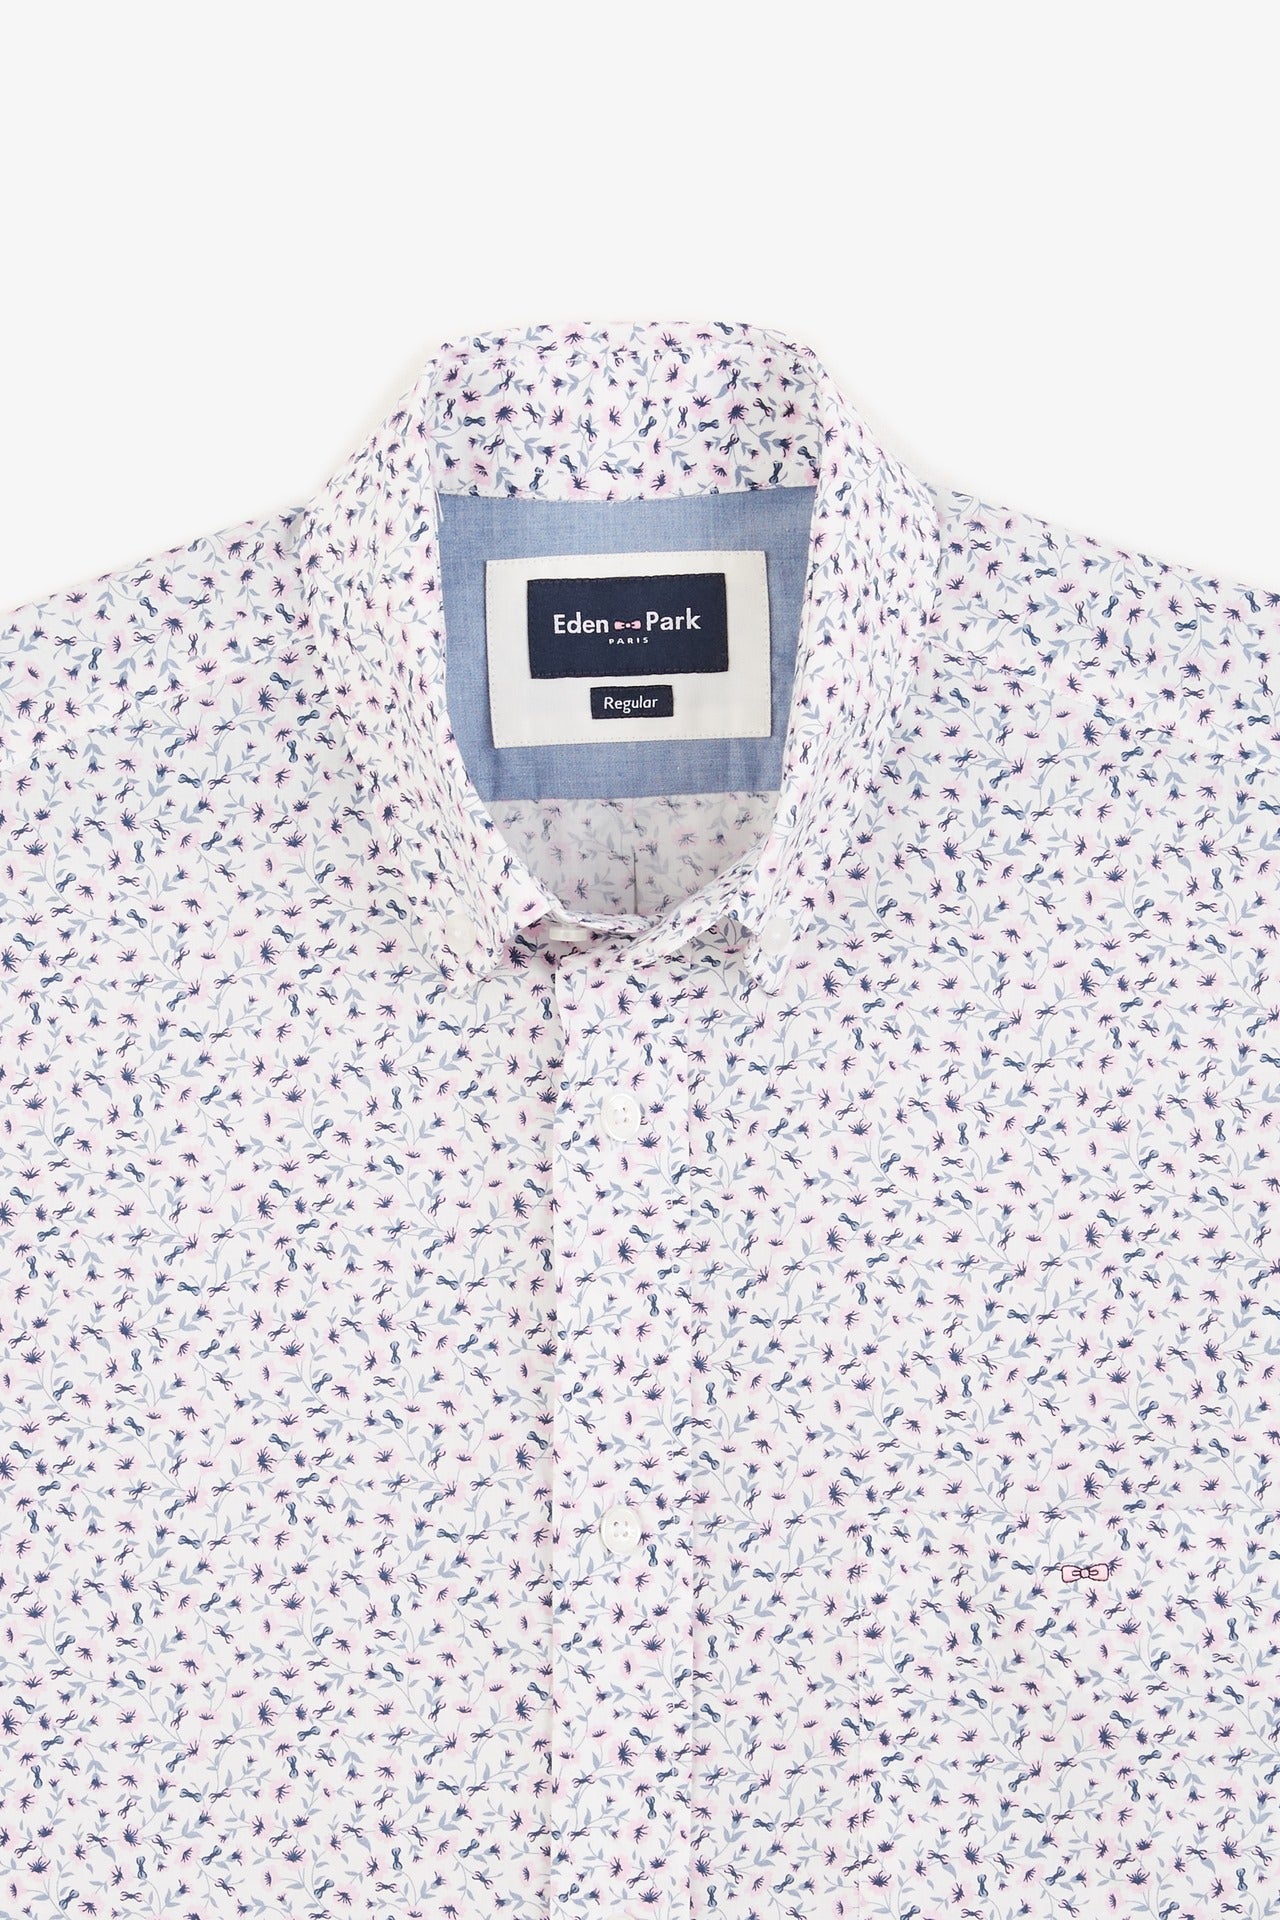 White shirt with exclusive floral print